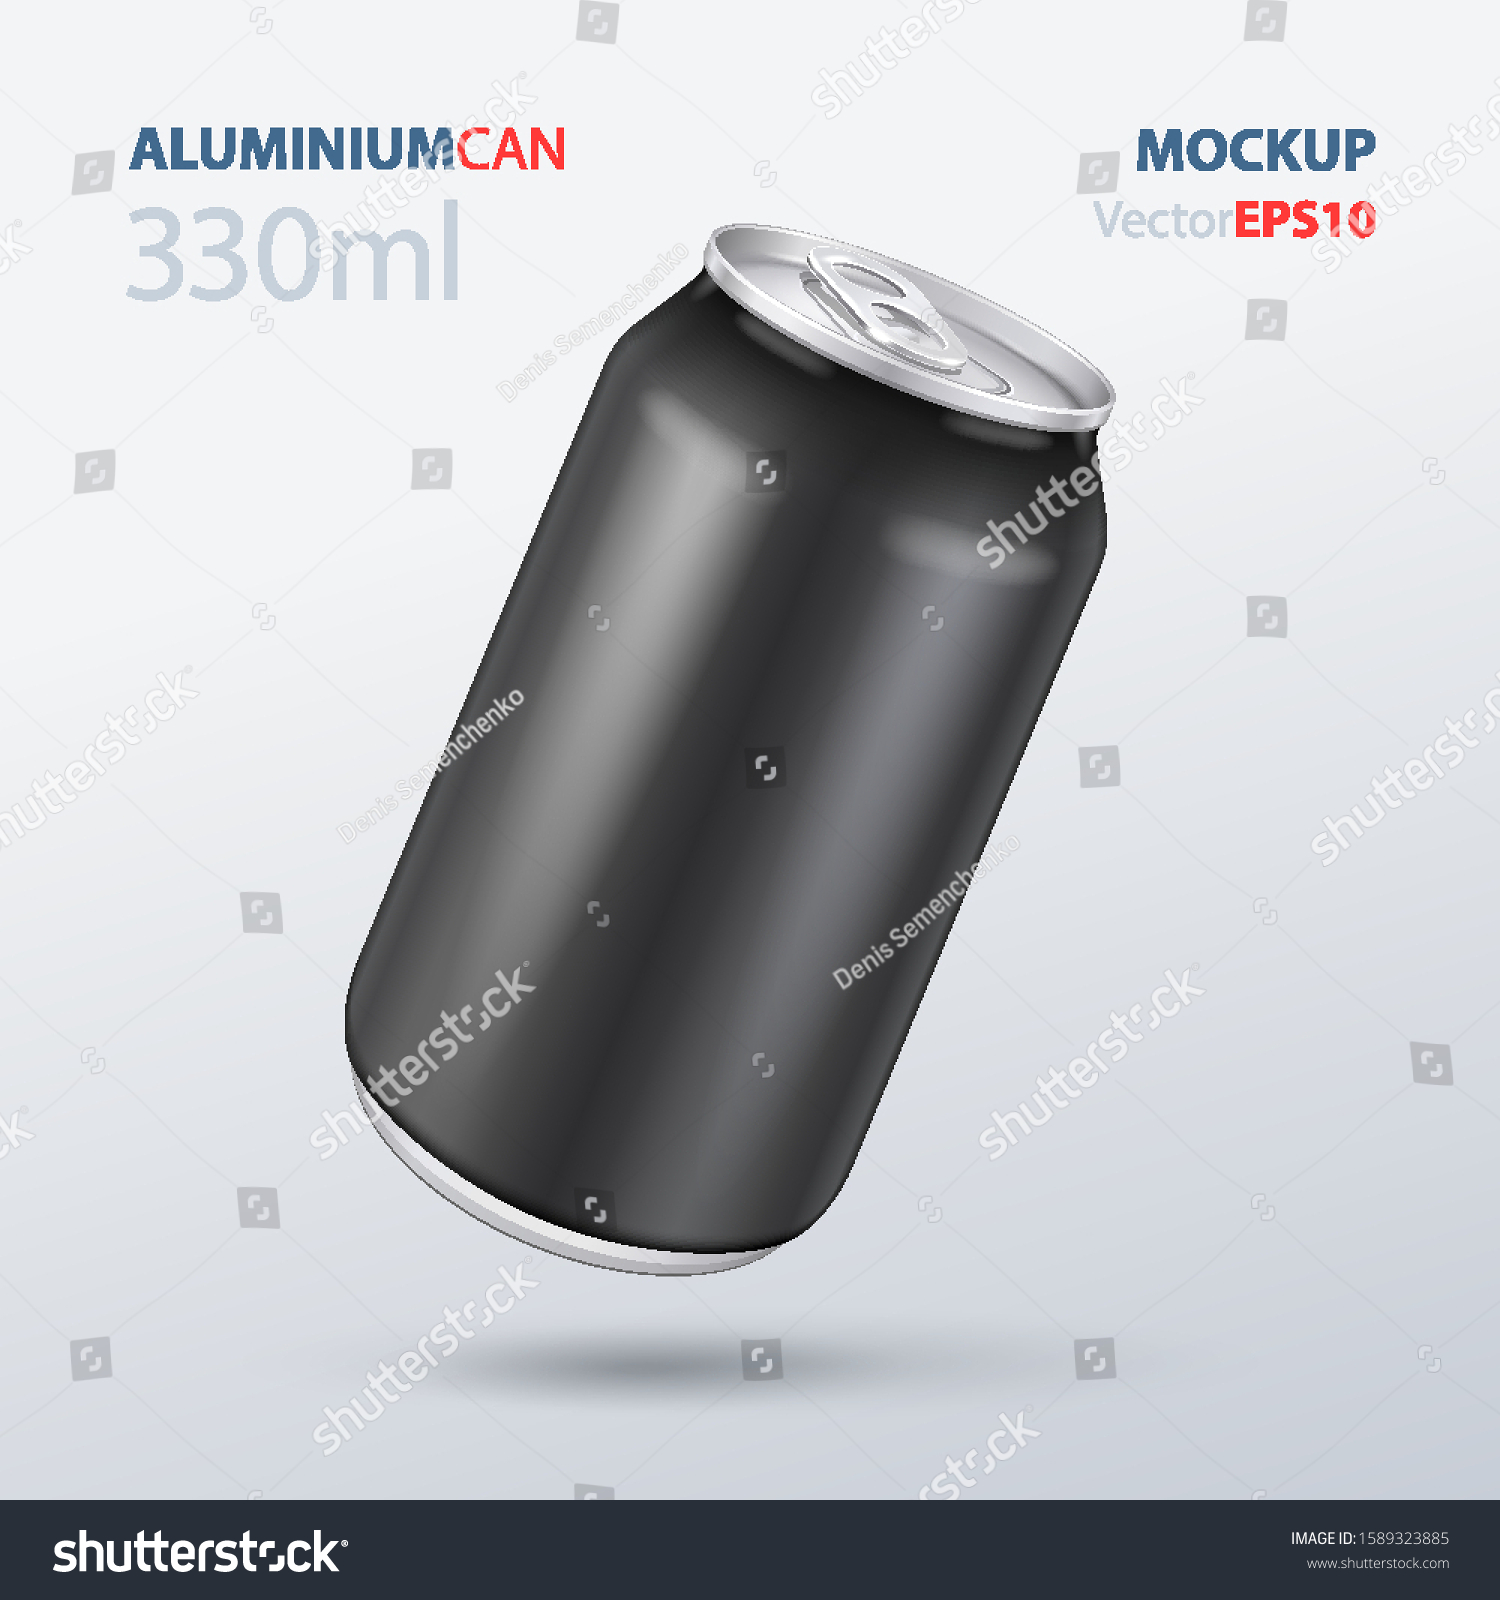 SVG of Mockup Black Metal Aluminum Beverage Drink Can 500ml, 0,5L. Beer, Soda, Lemonade, Juice, Energy. Mock Up Template Ready For Your Design. Isolated On White Background. Product Packing. Vector EPS10 svg